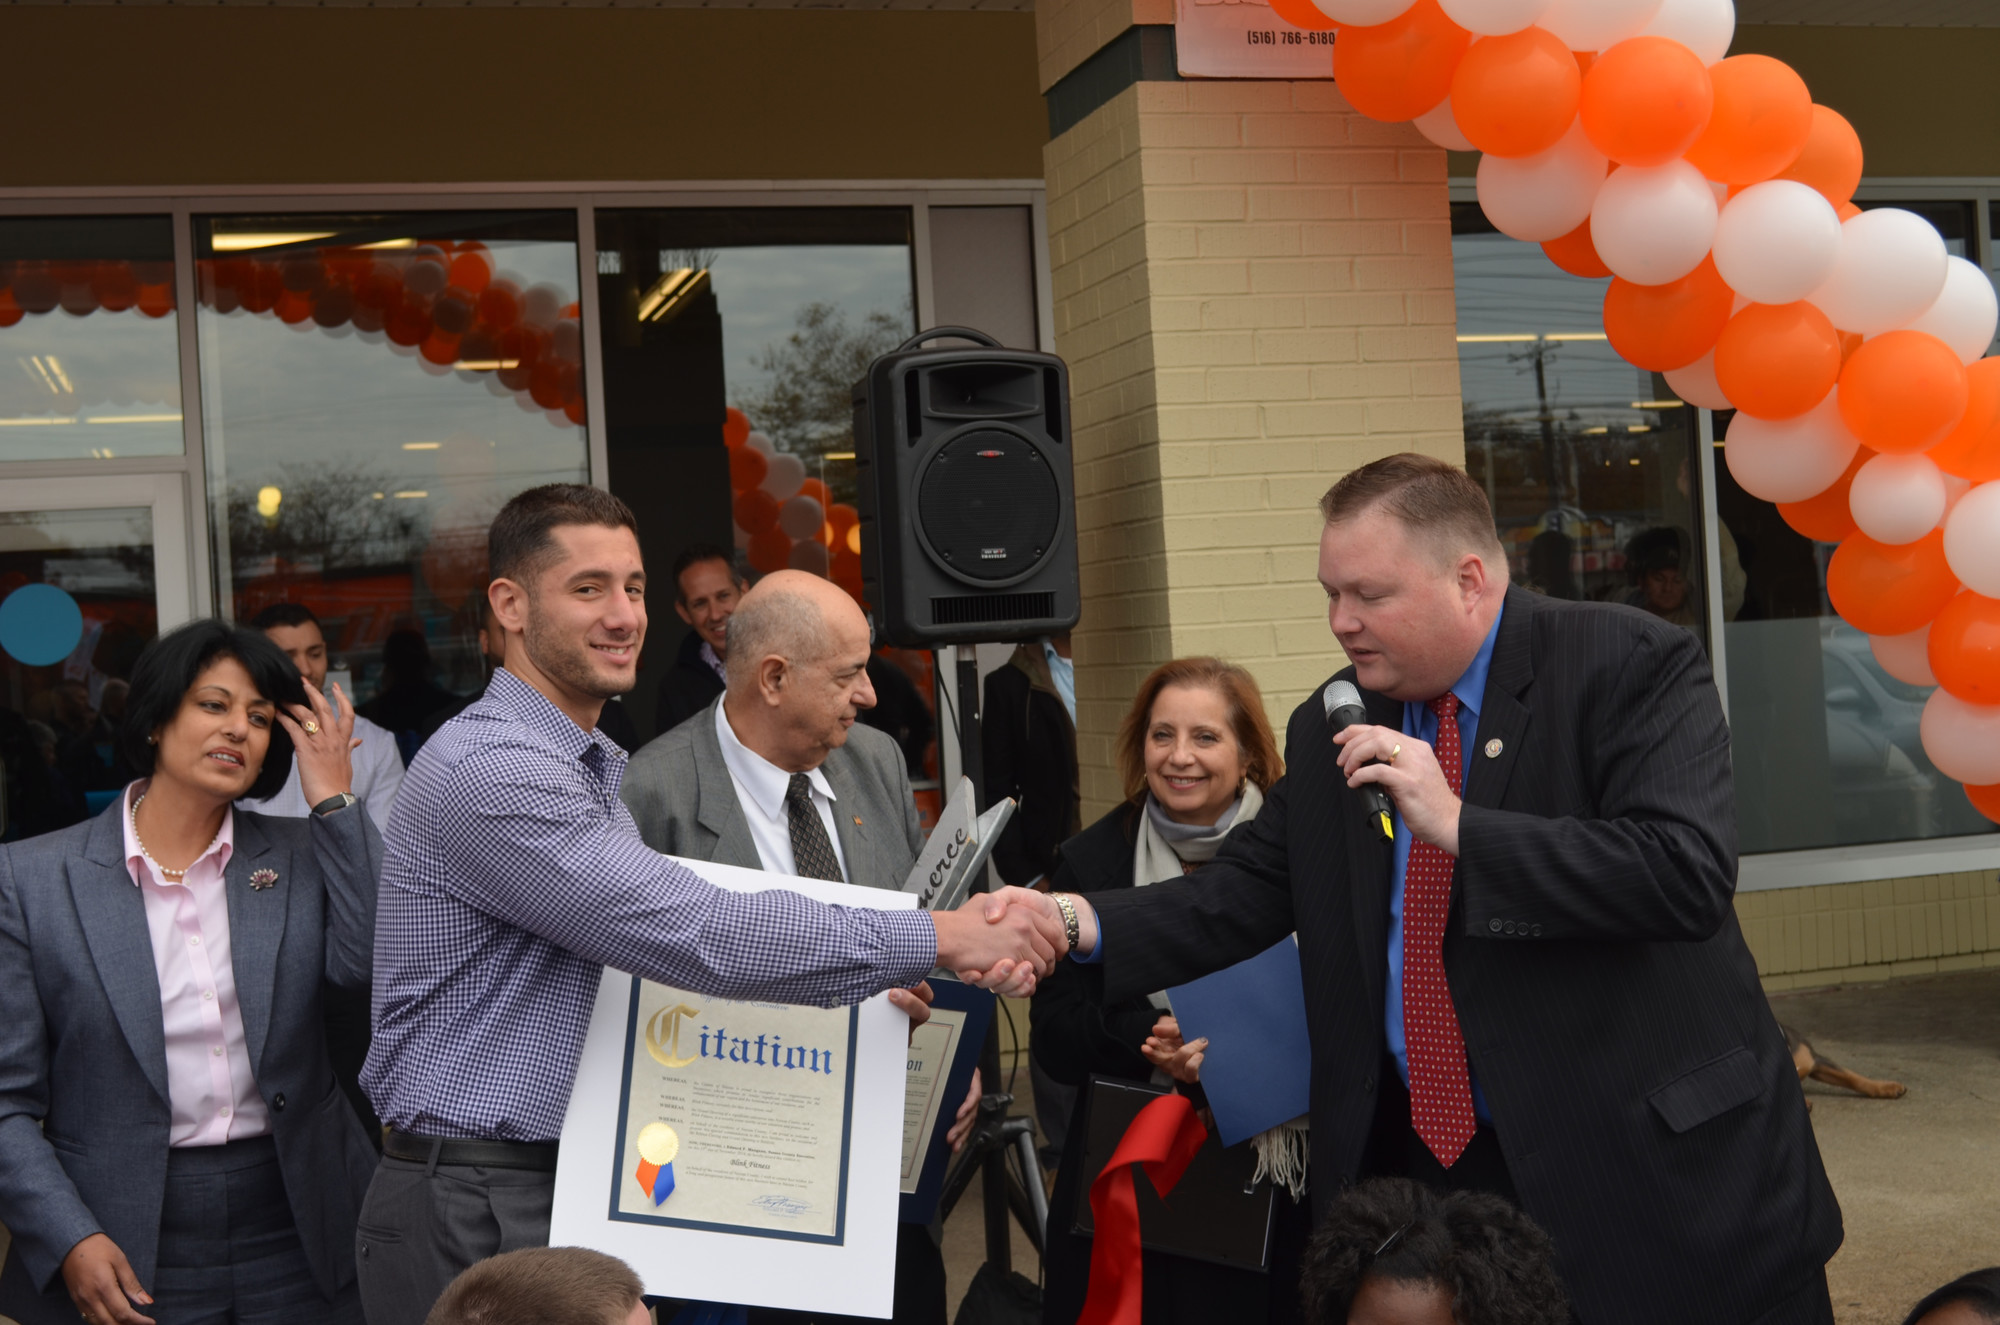 Stephen Catanzaro, left, Blink’s Baldwin club manager, shook hands with local politicans and community leaders, including Chris Brown from County Executive Ed Mangano’s office, during the grand opening ceremony.